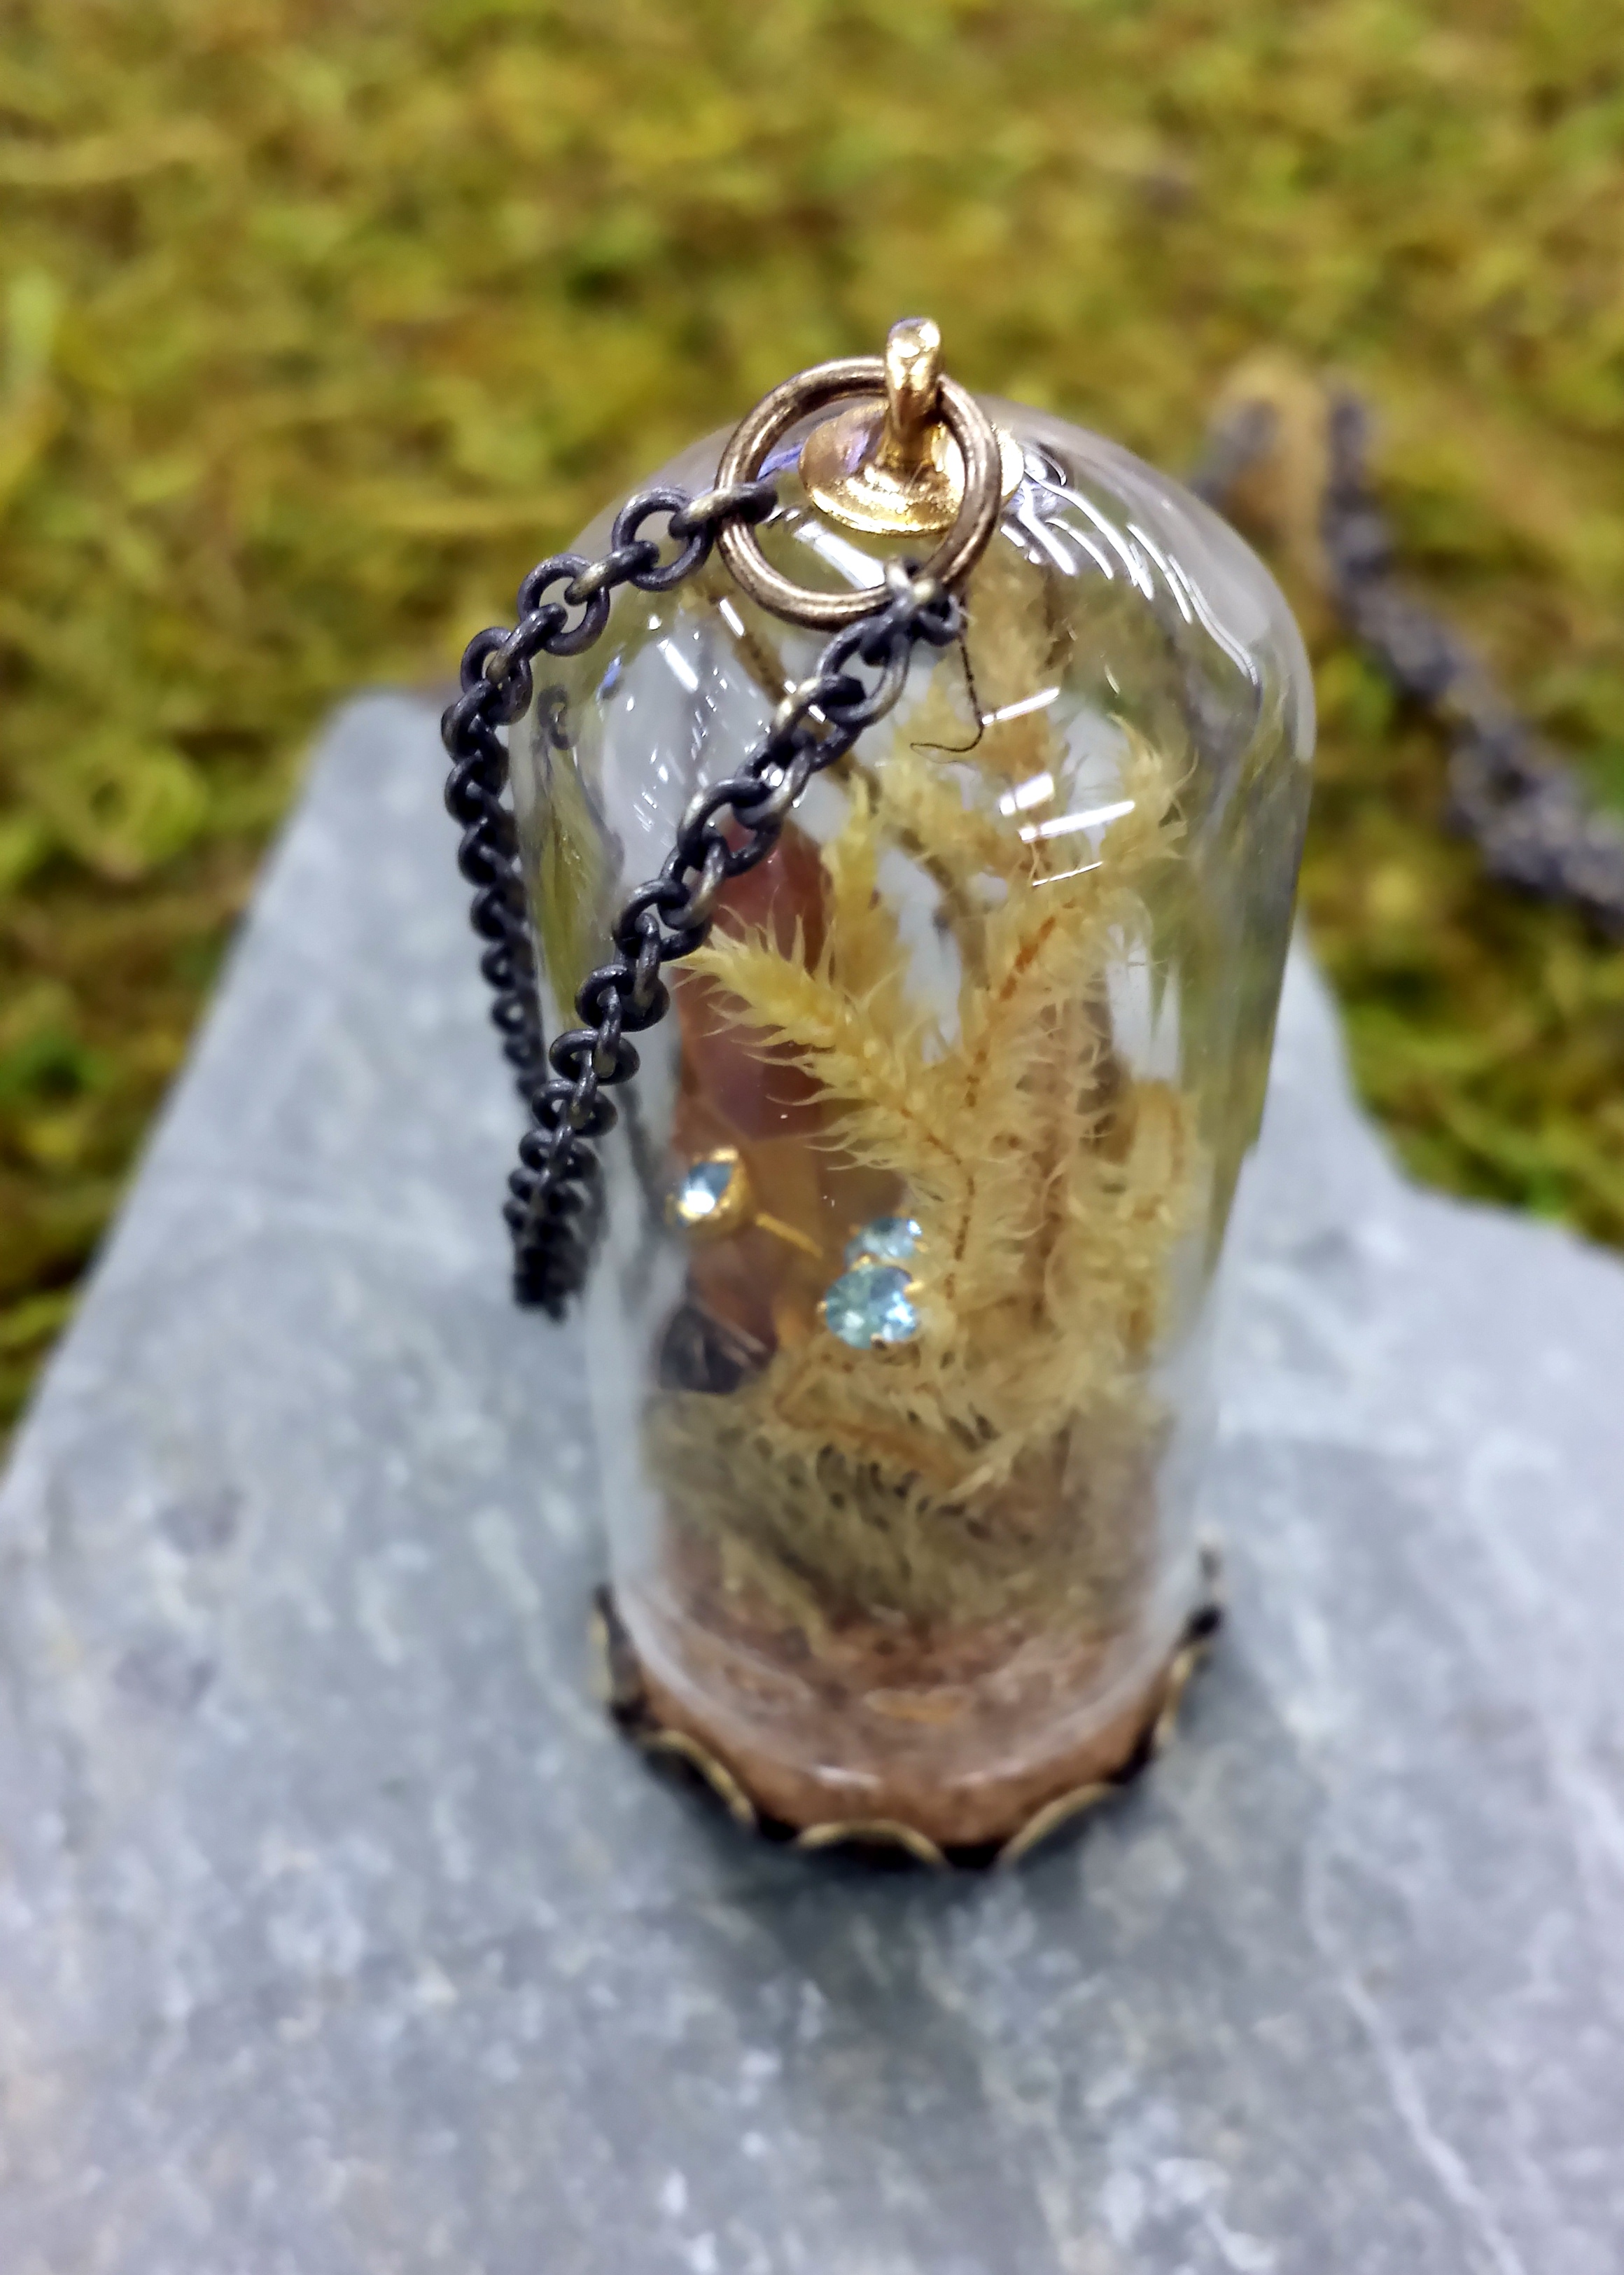 can be removed comes with moss or flowers 23\u201d inch chain Simple Glass Bottle Necklace Pendant DIY